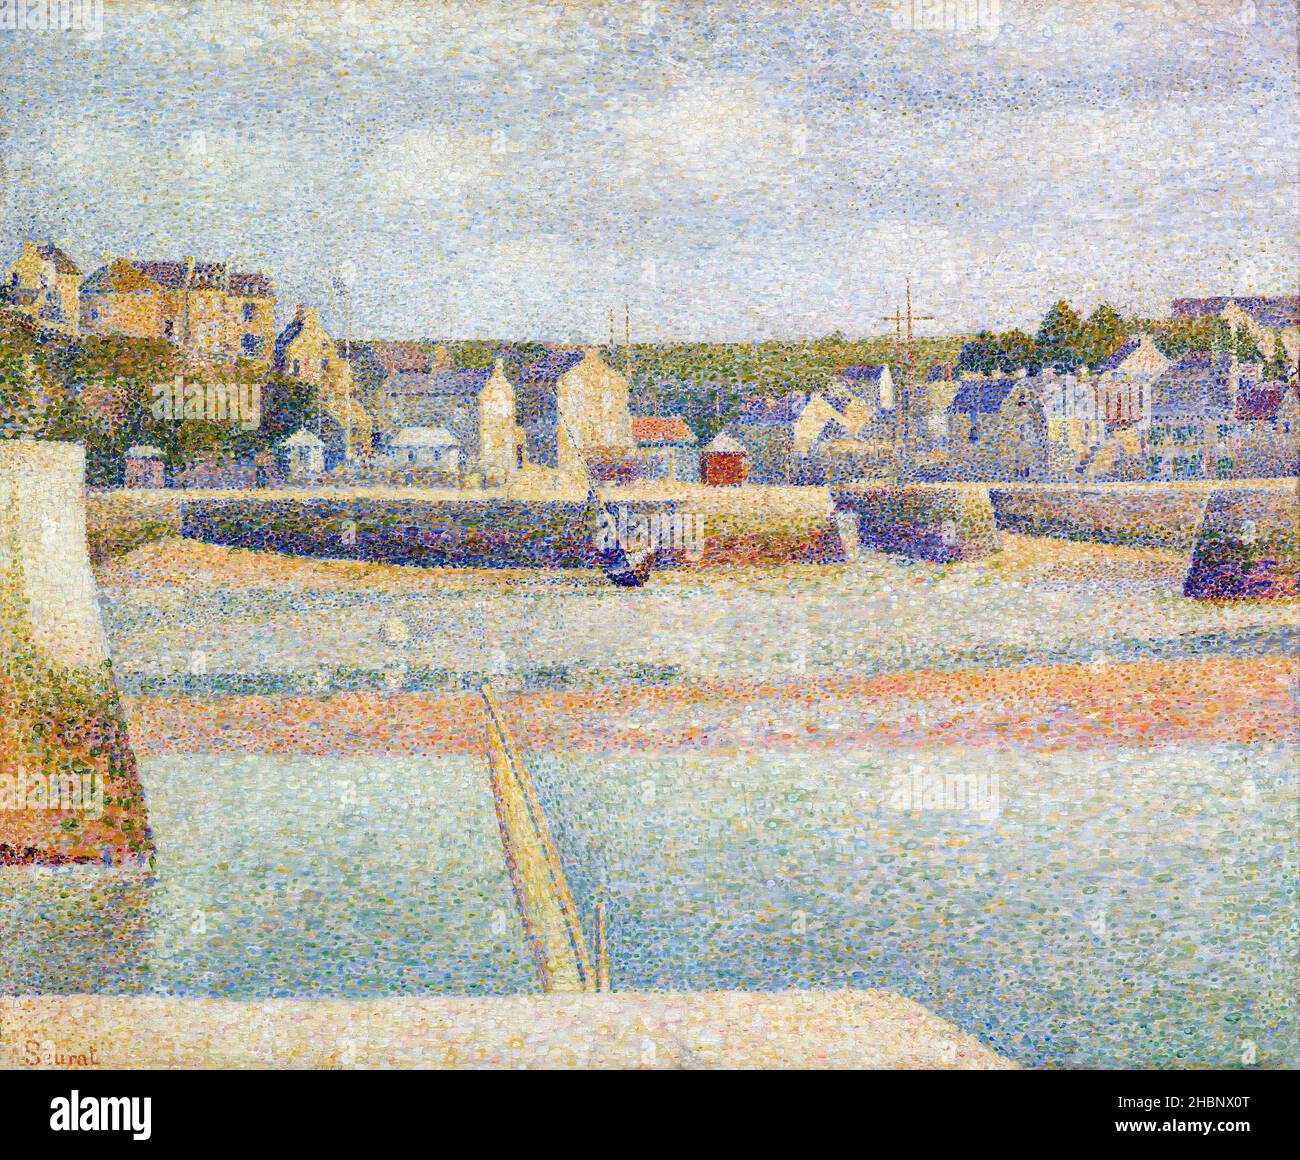 Georges Seurat - The Outer Harbor (1888) famous painting. Stock Photo